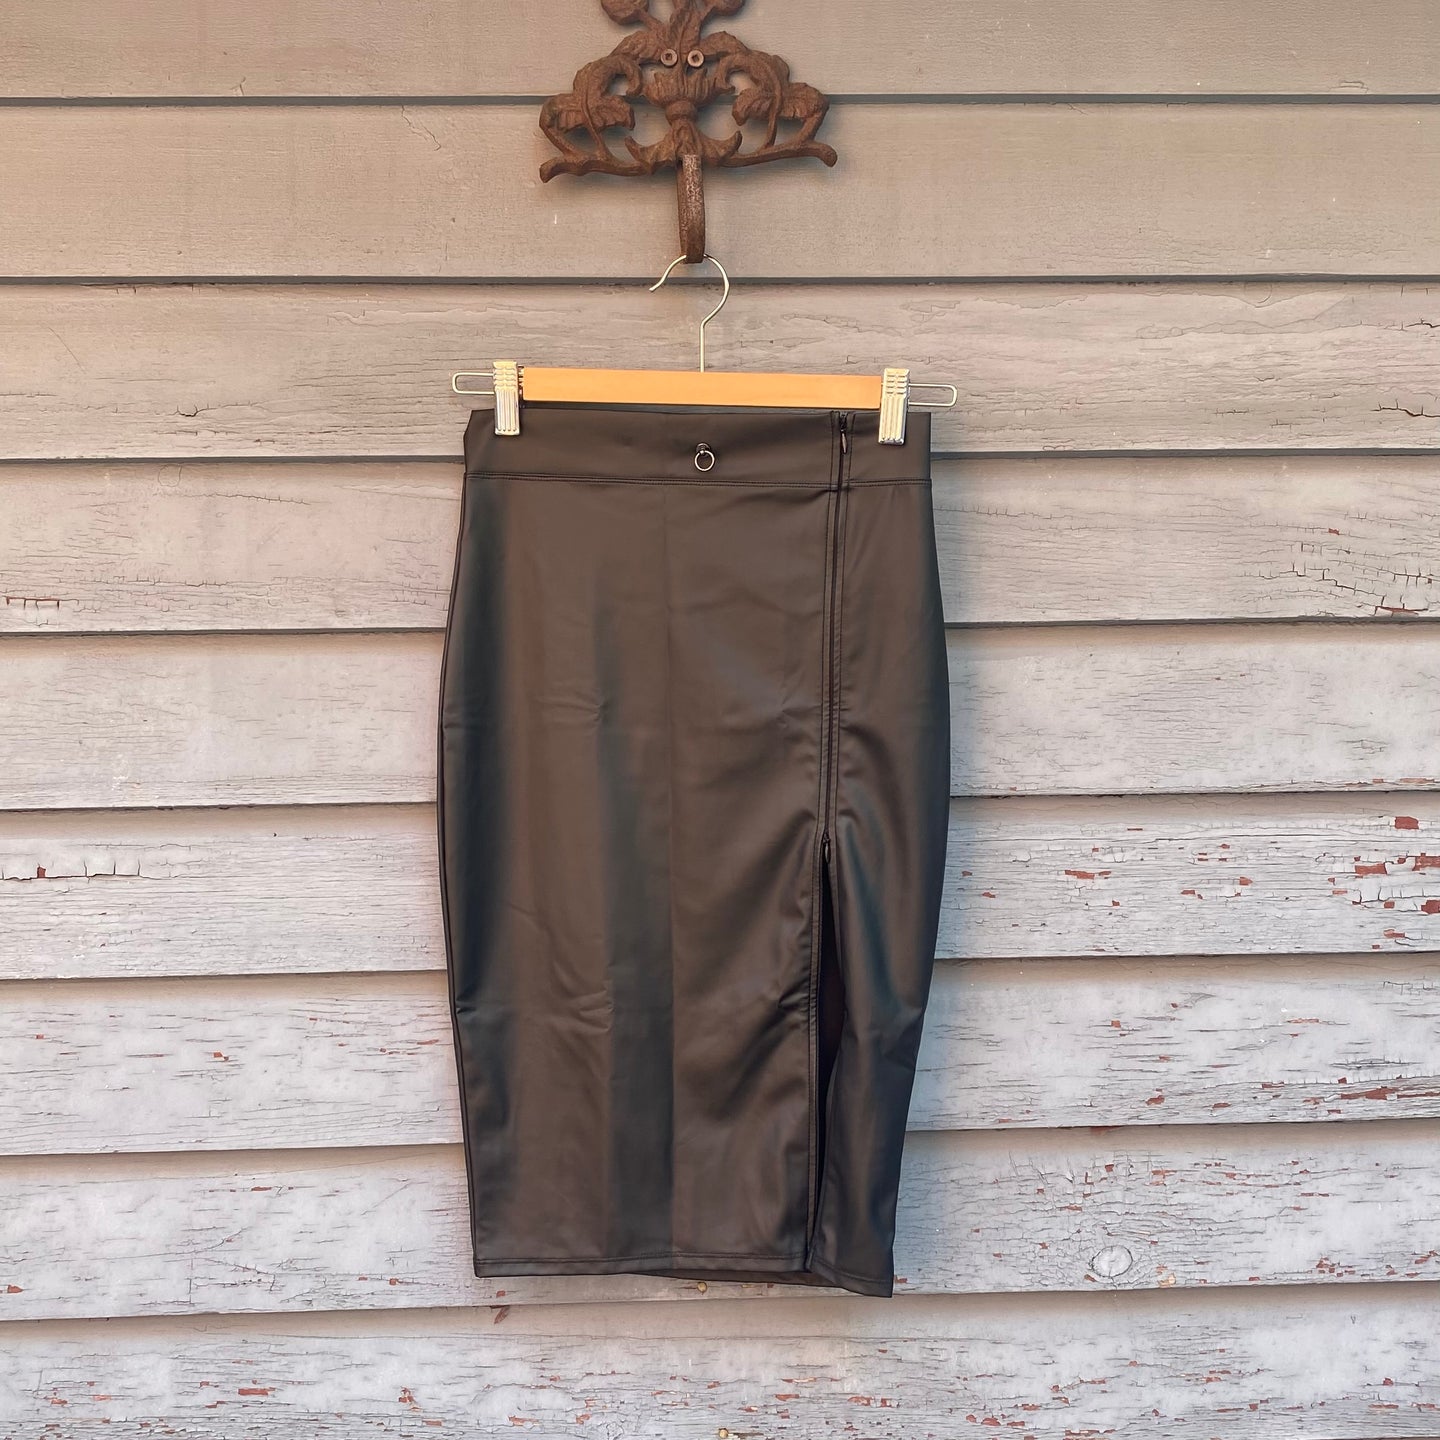 New With Tags Chambre Noir Maison Close Sexy Black Pencil Skirt - Size 4 (runs small)